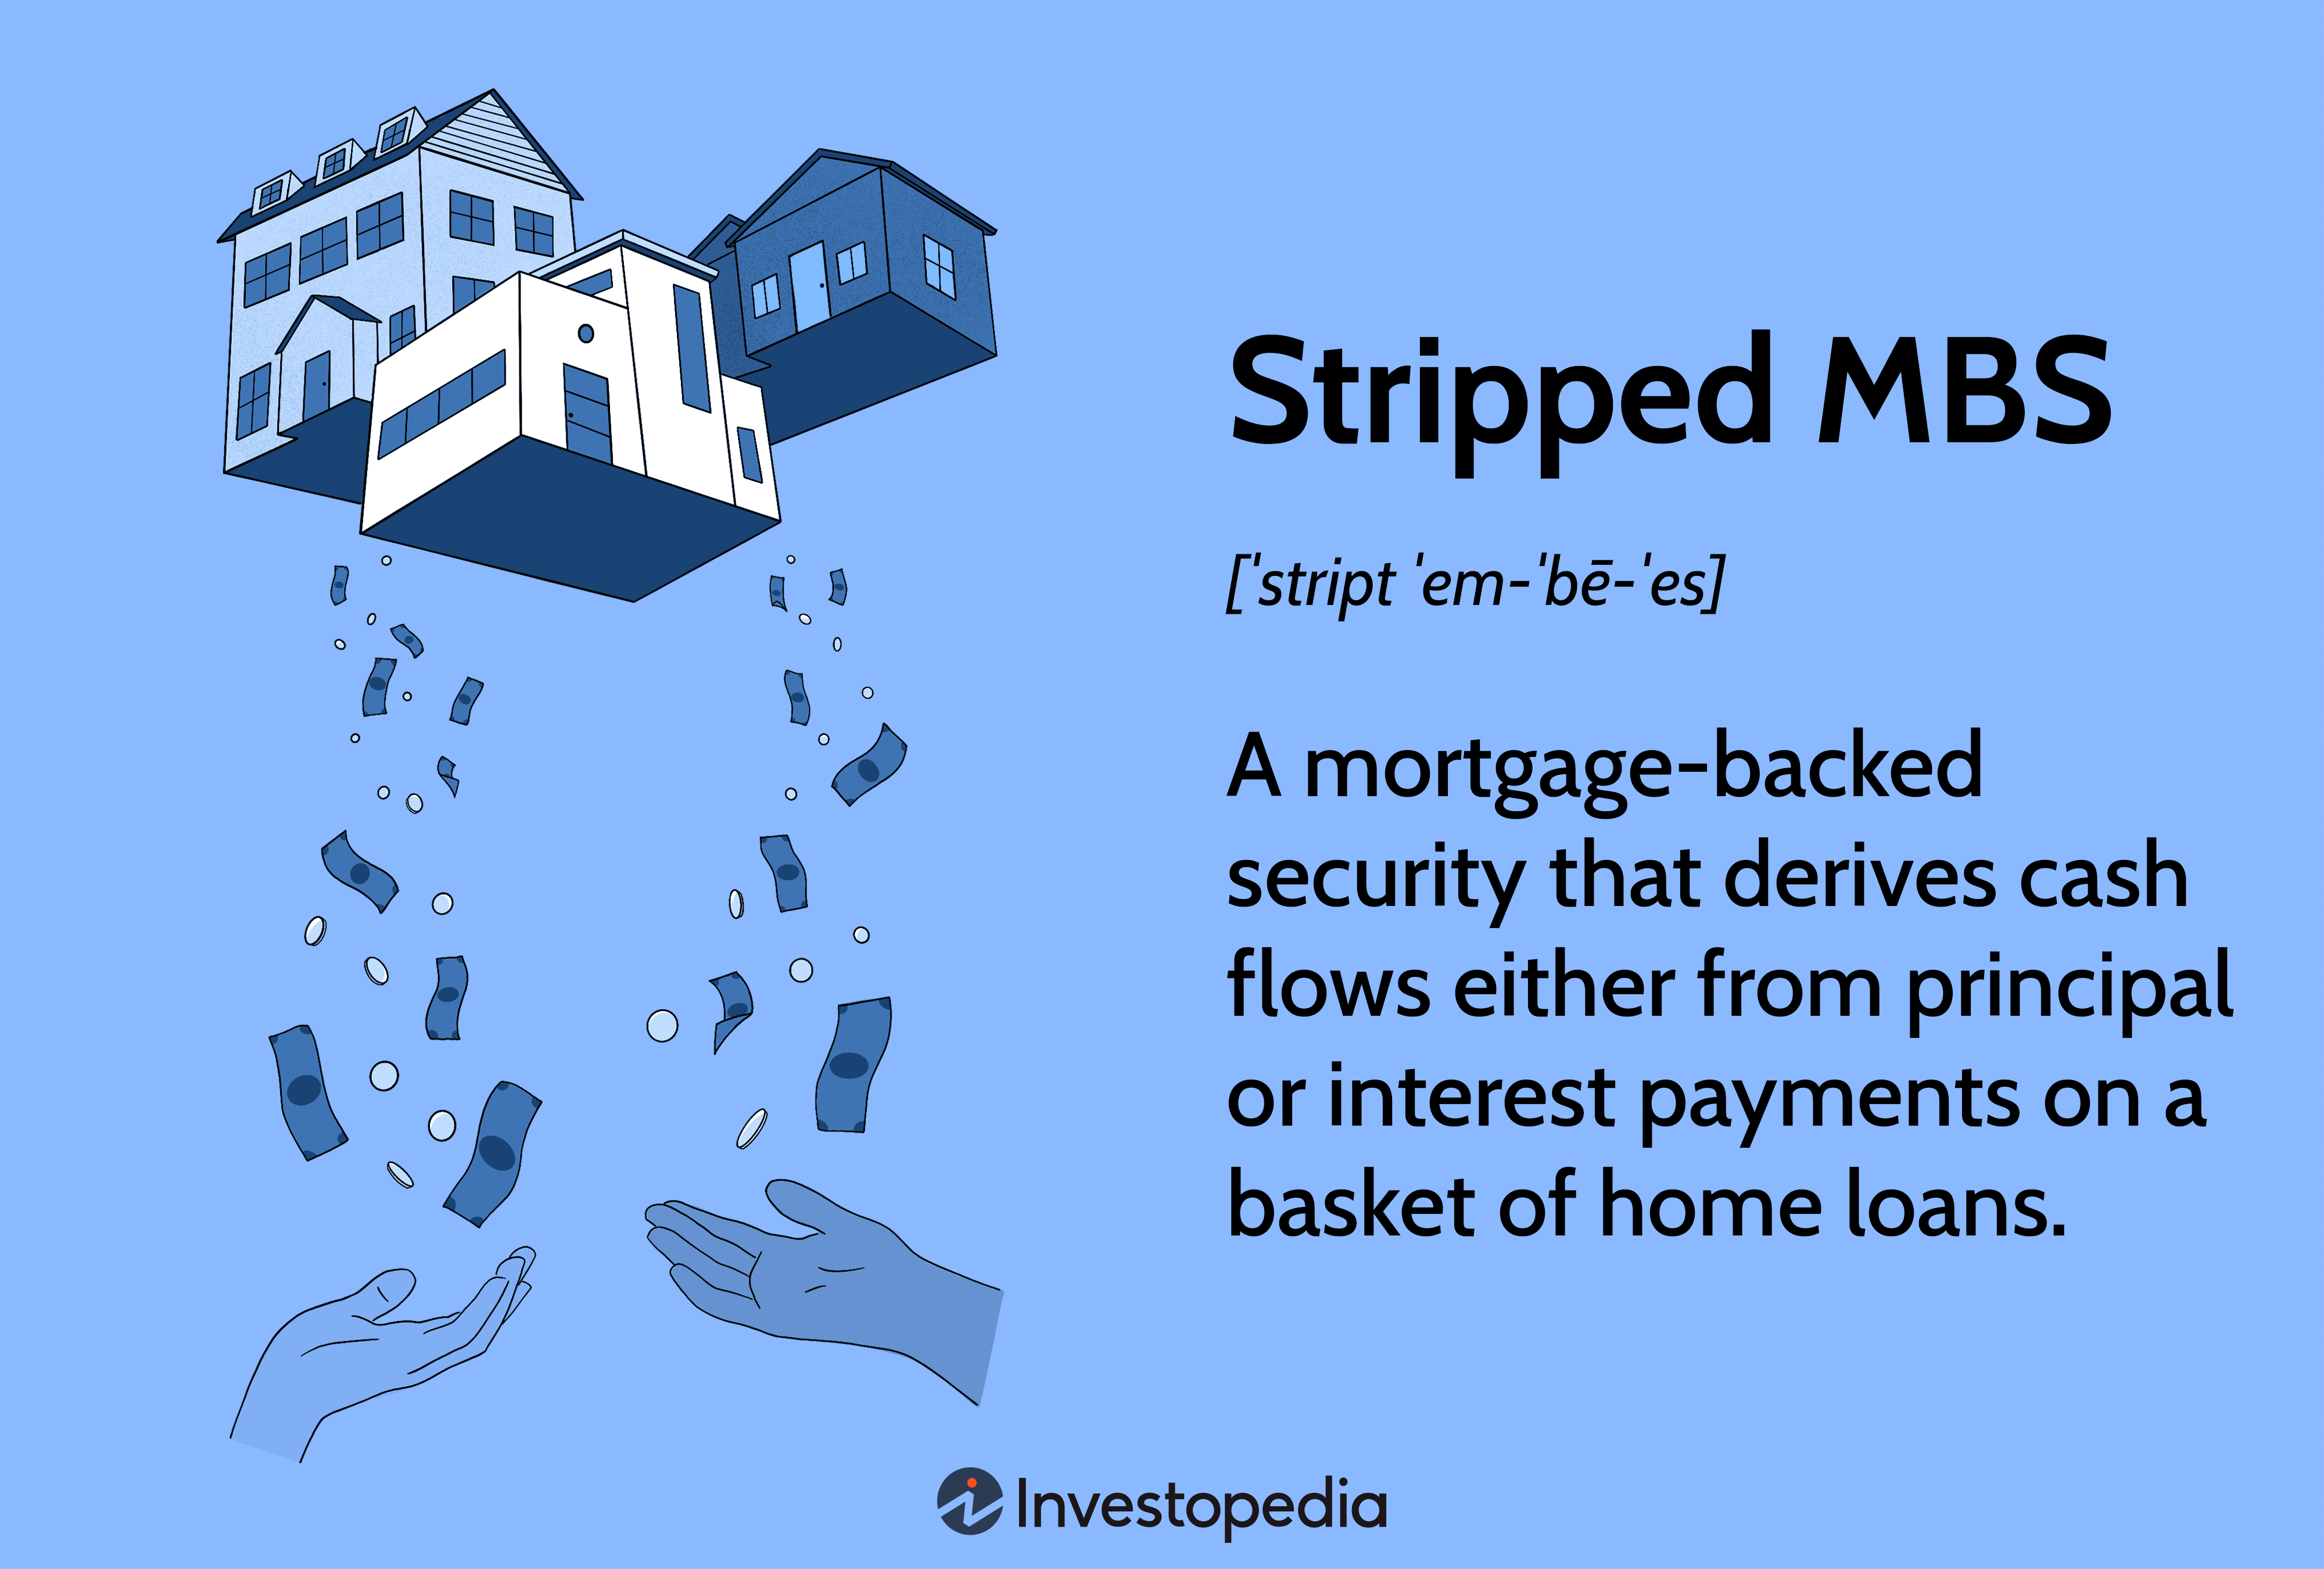 Stripped MBS